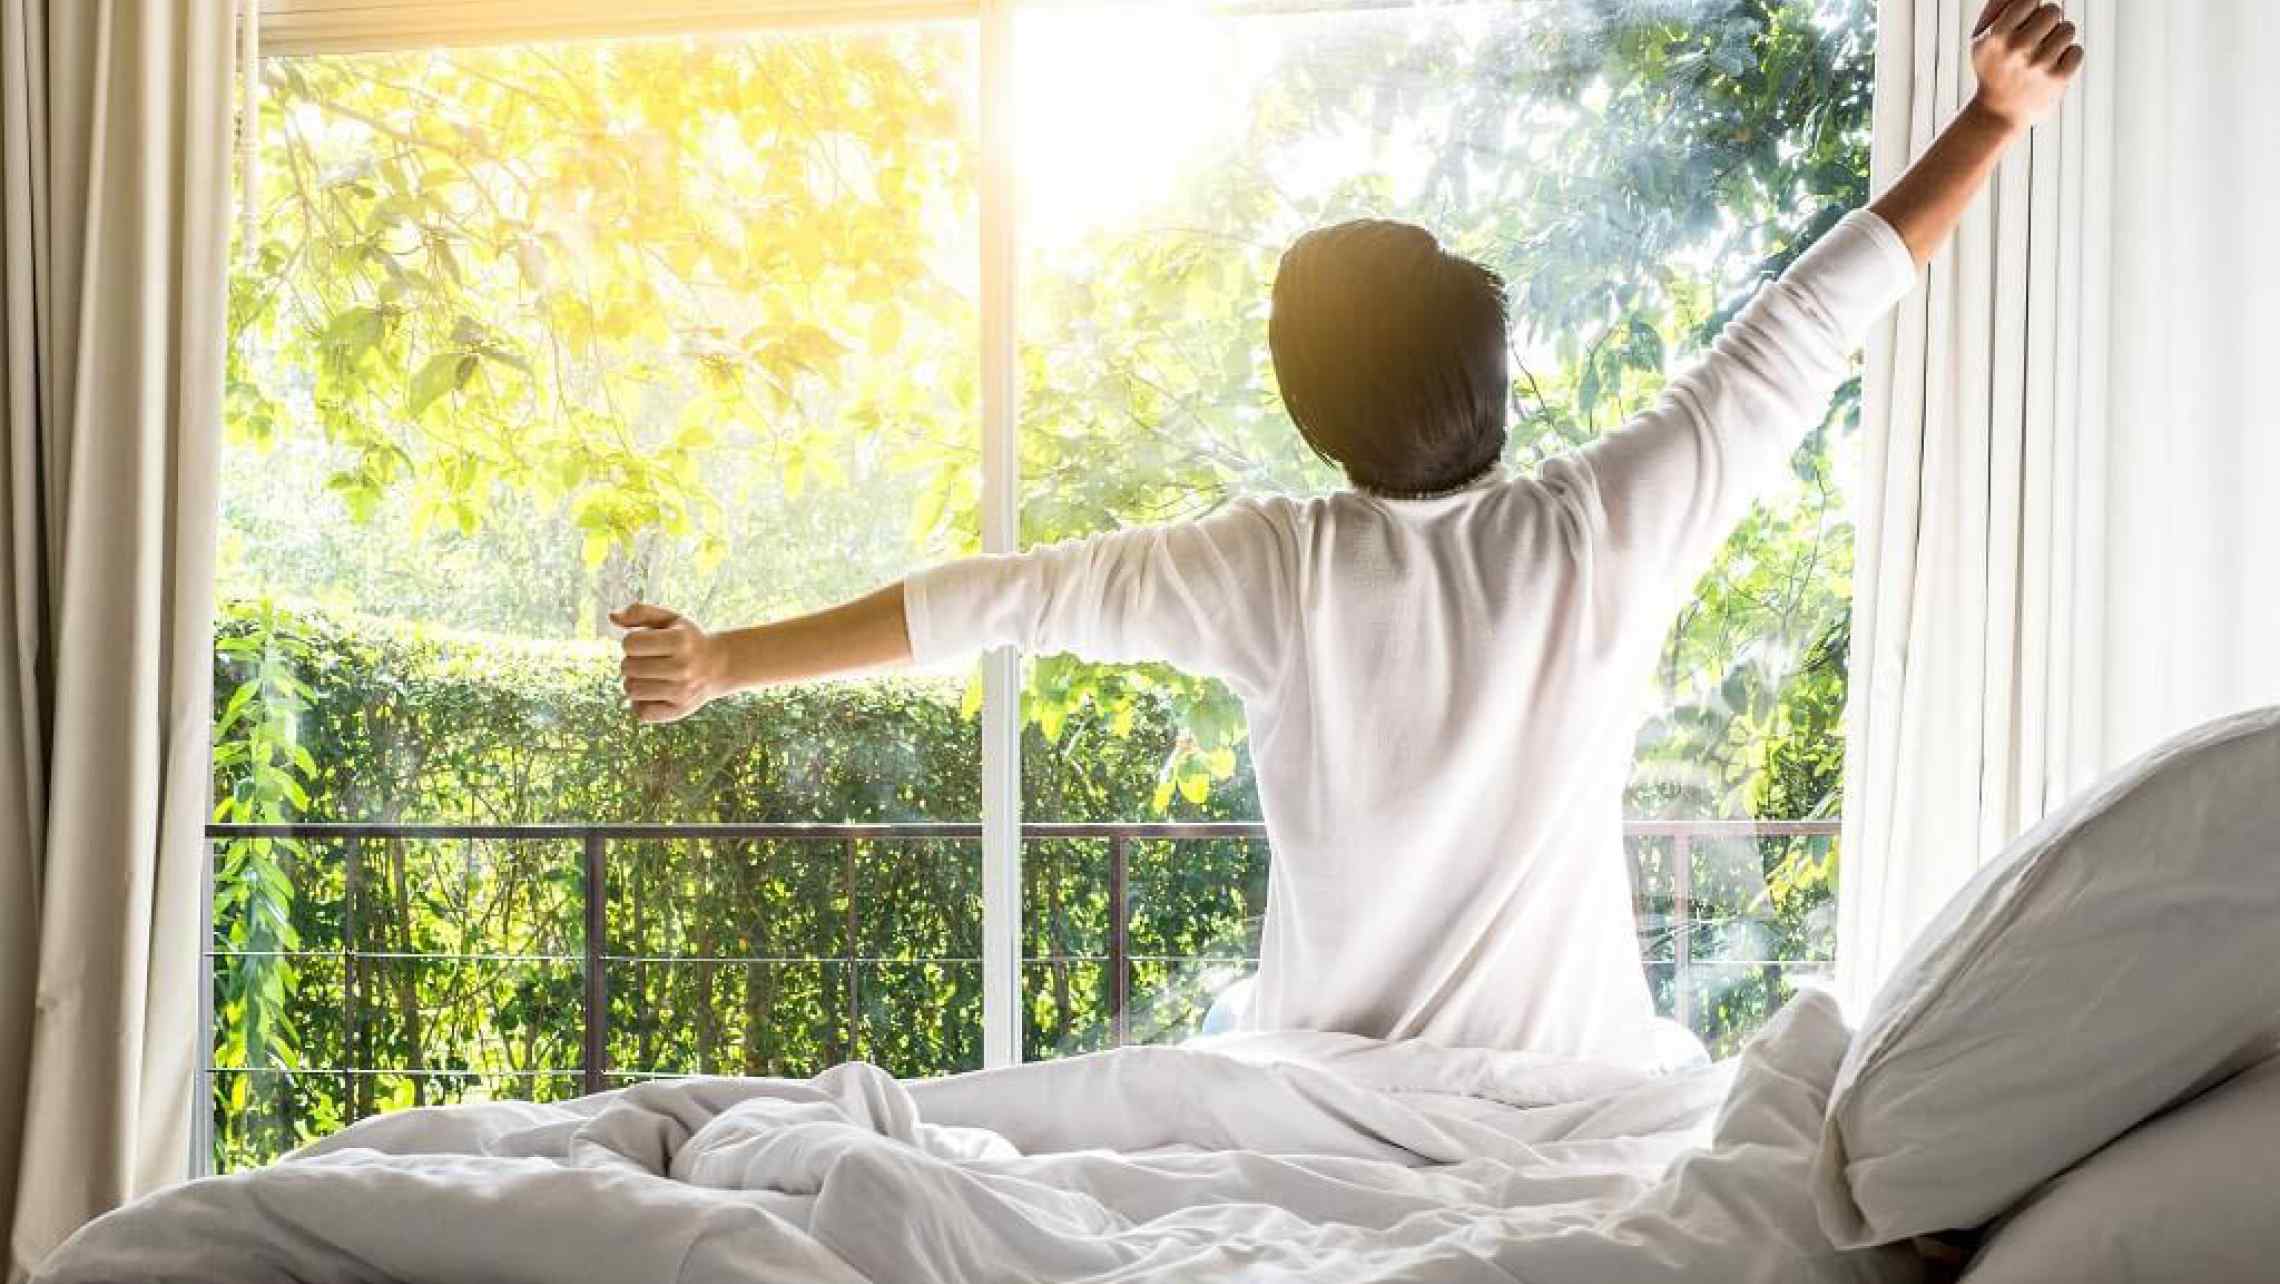 THIS IS THE IMPORTANCE OF SLEEP ON YOUR MENTAL HEALTH